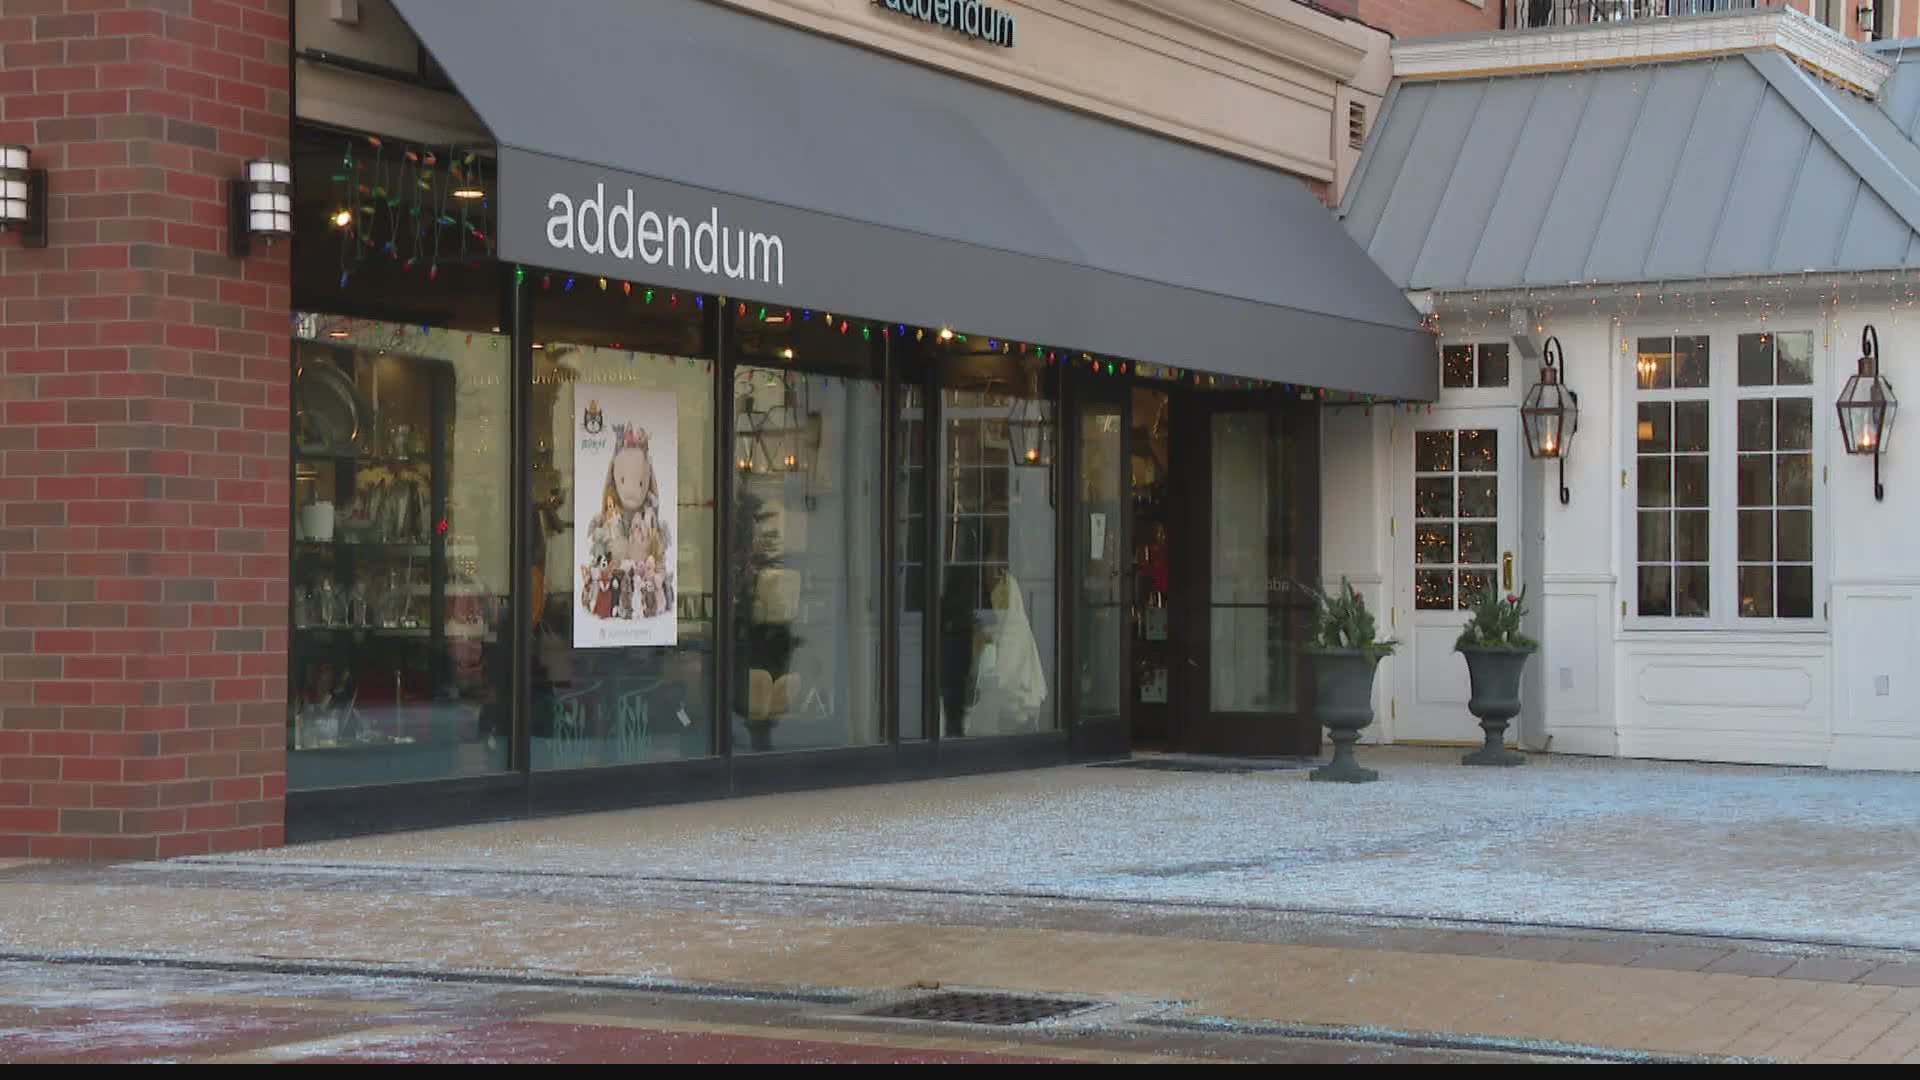 Addendum opened 17 years ago and has enjoyed the success of Carmel’s holiday traditions.